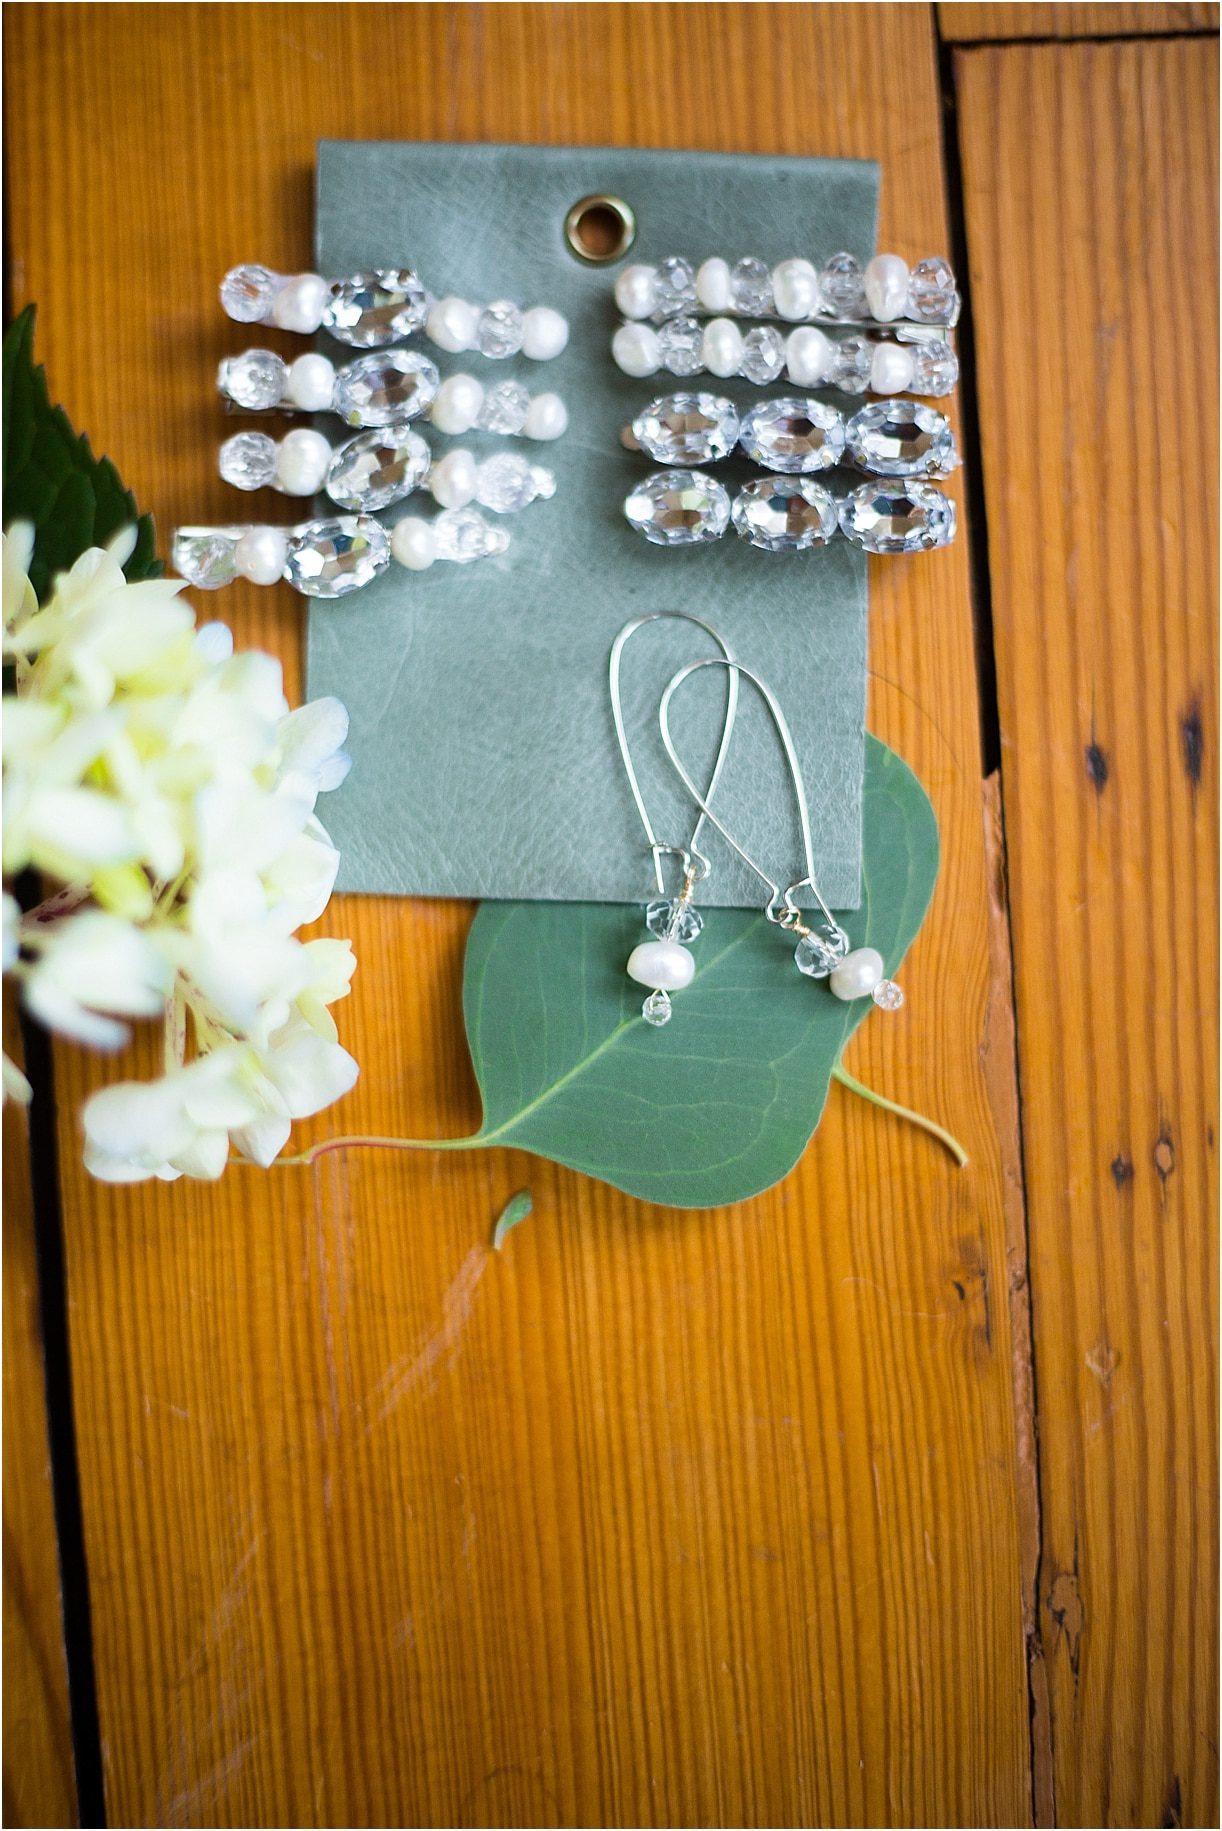 How to Make Earrings for Your Wedding Day | Hill City Bride Virginia Weddings Blog